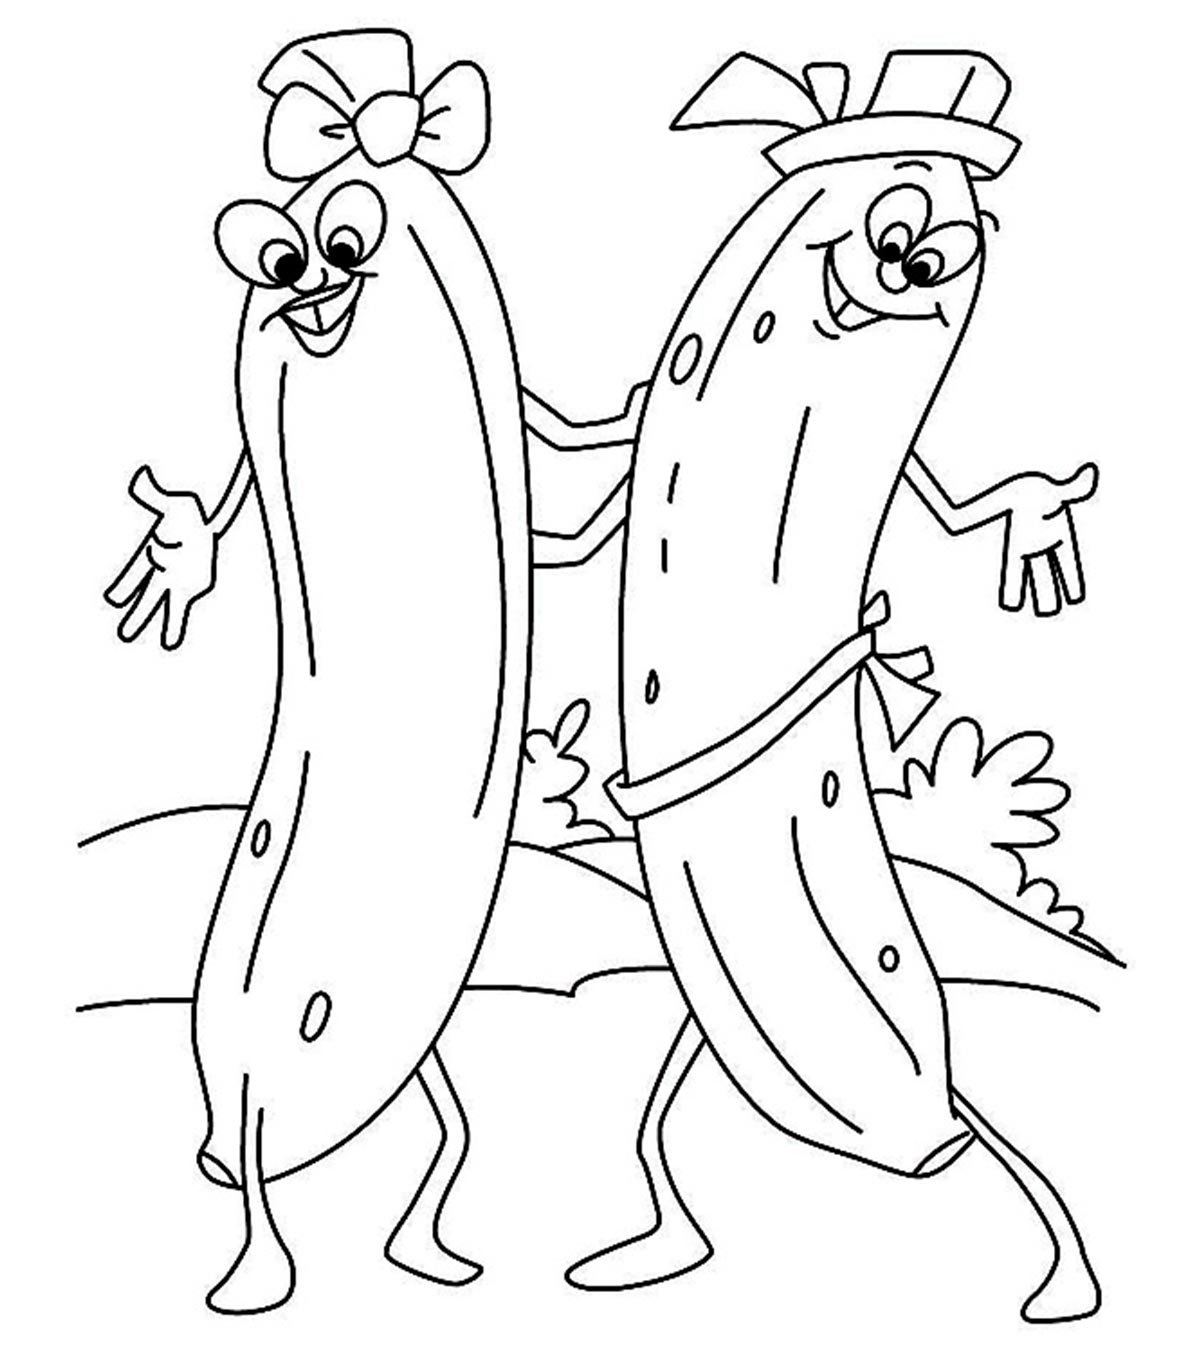 Top 25 Banana Coloring Pages Your Toddler Will Love To_image